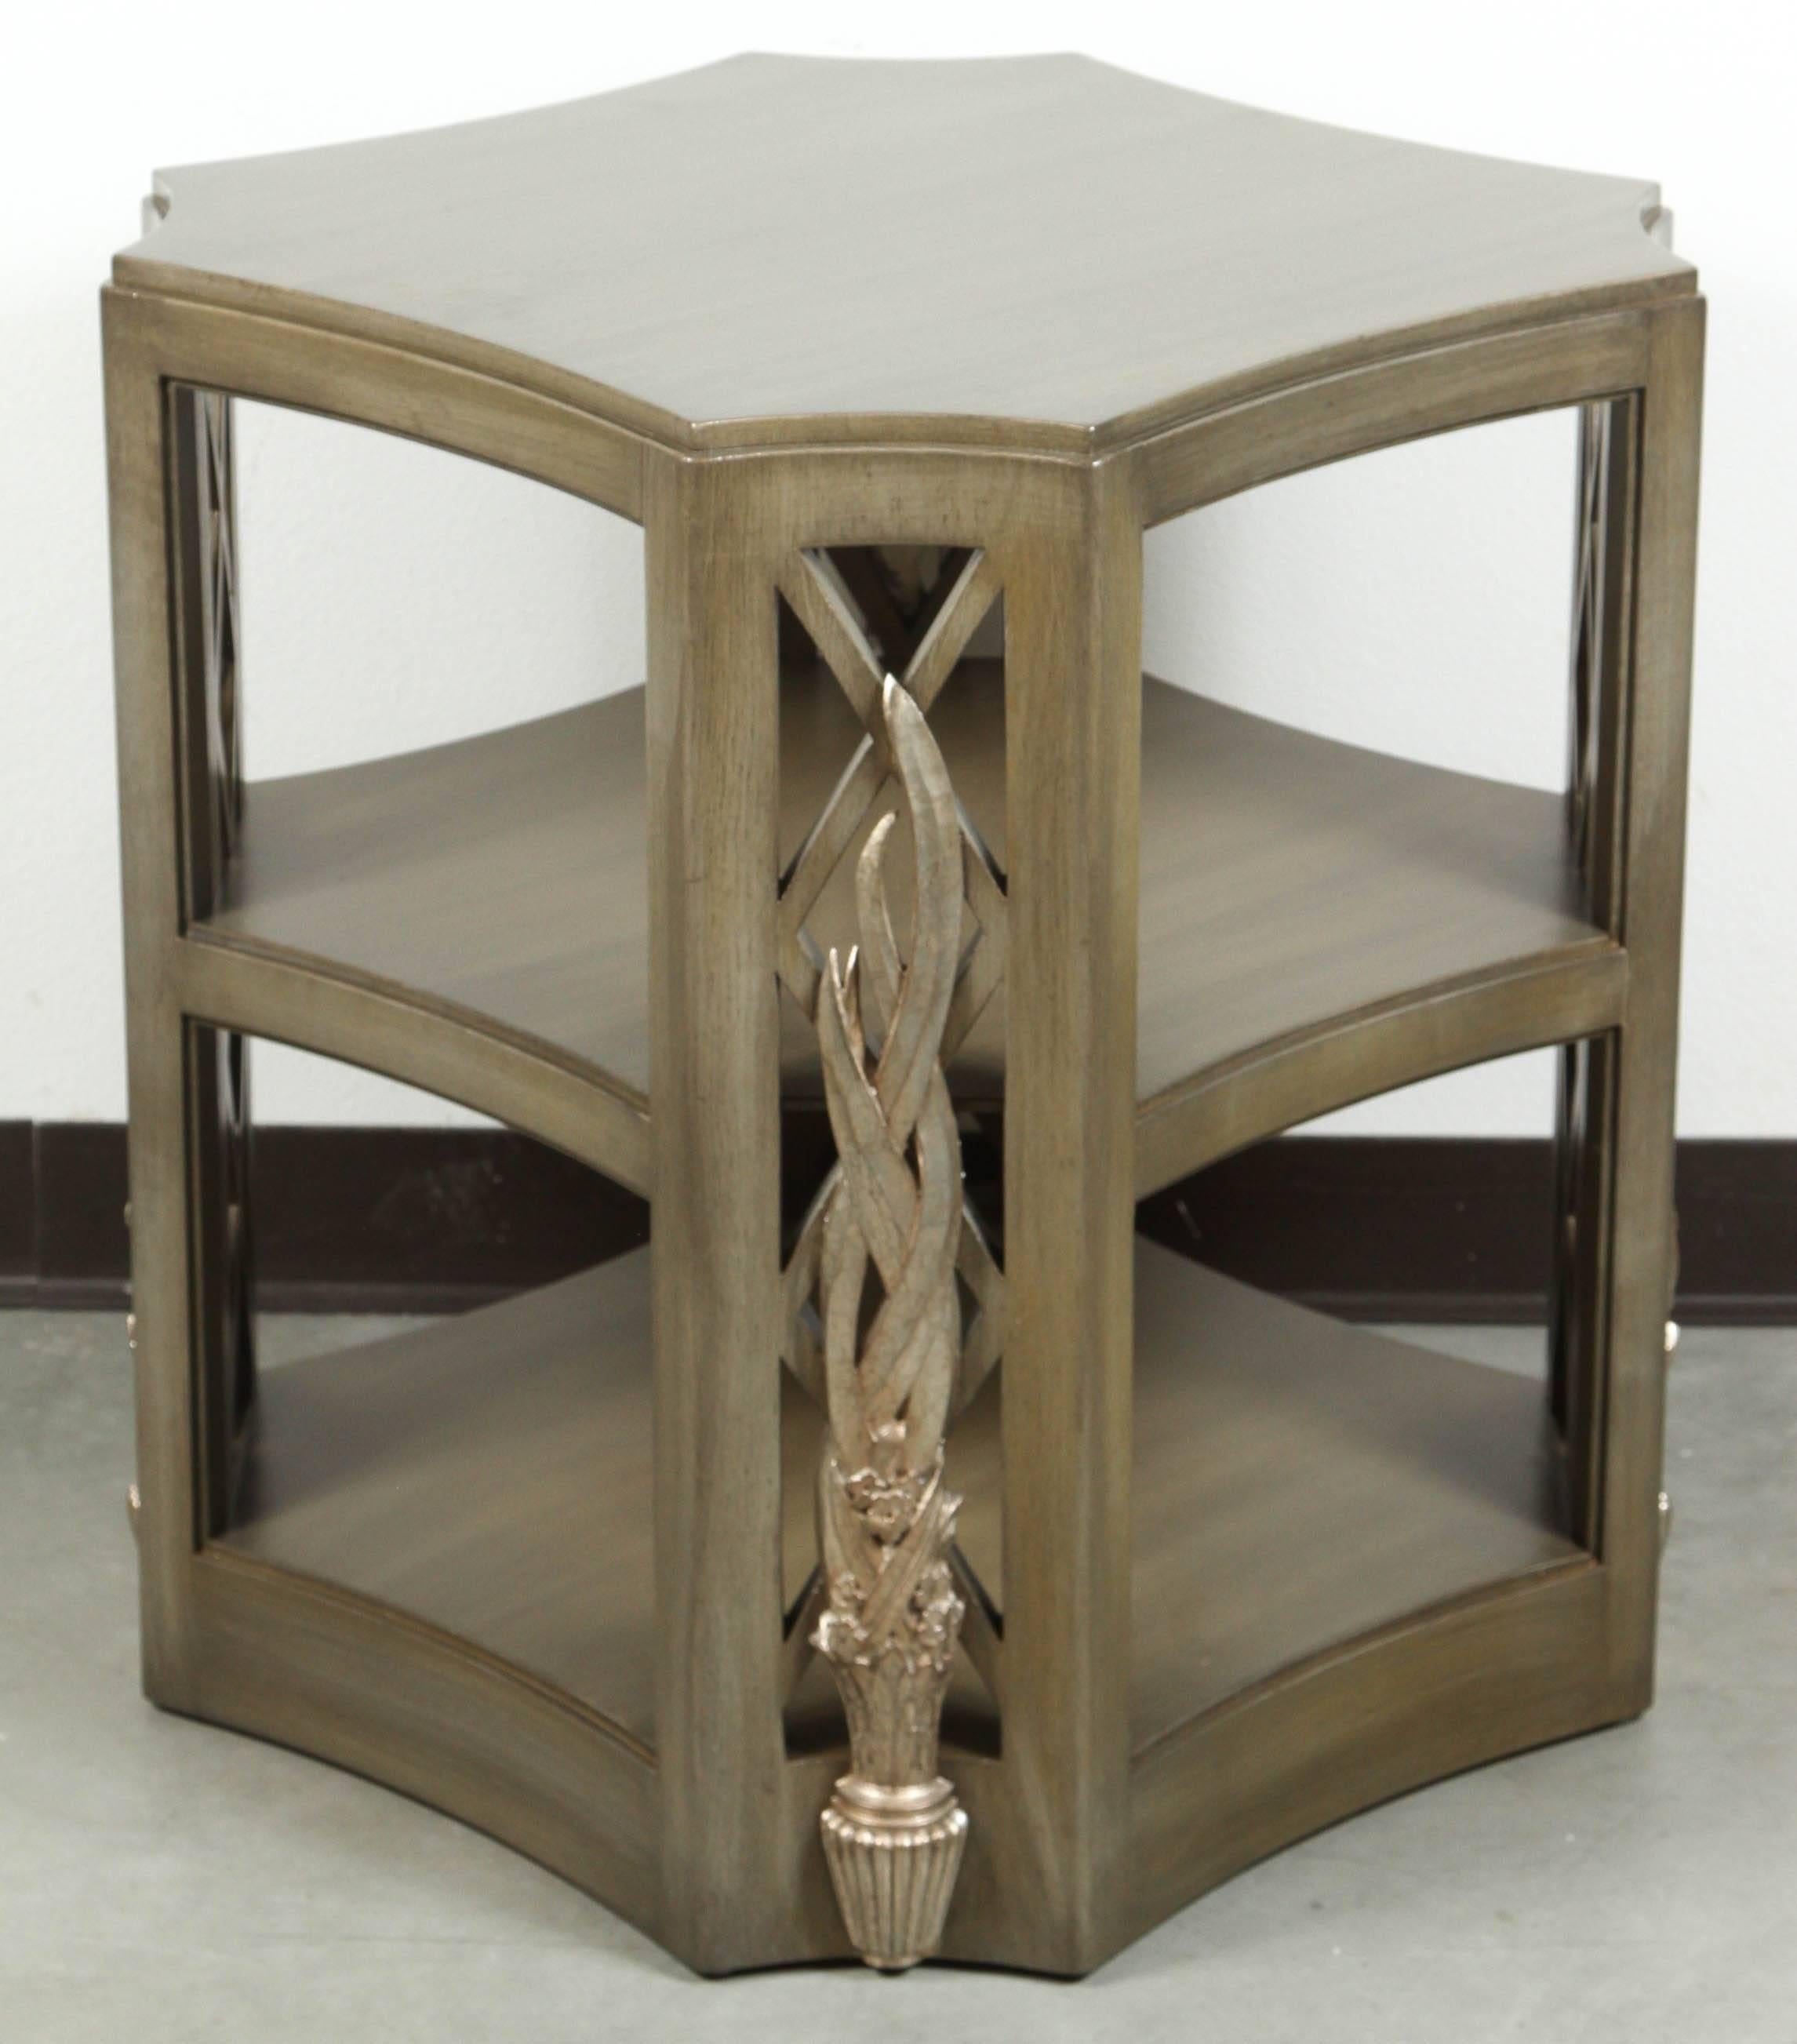 Exquisite oak rare table by James Mont. This is Mont at his best. Unusual design, wonderful craftsmanship, with high quality decorative carved elements.
The table is newly refinished in a Classic gray-green, with the carving picked out in glazed